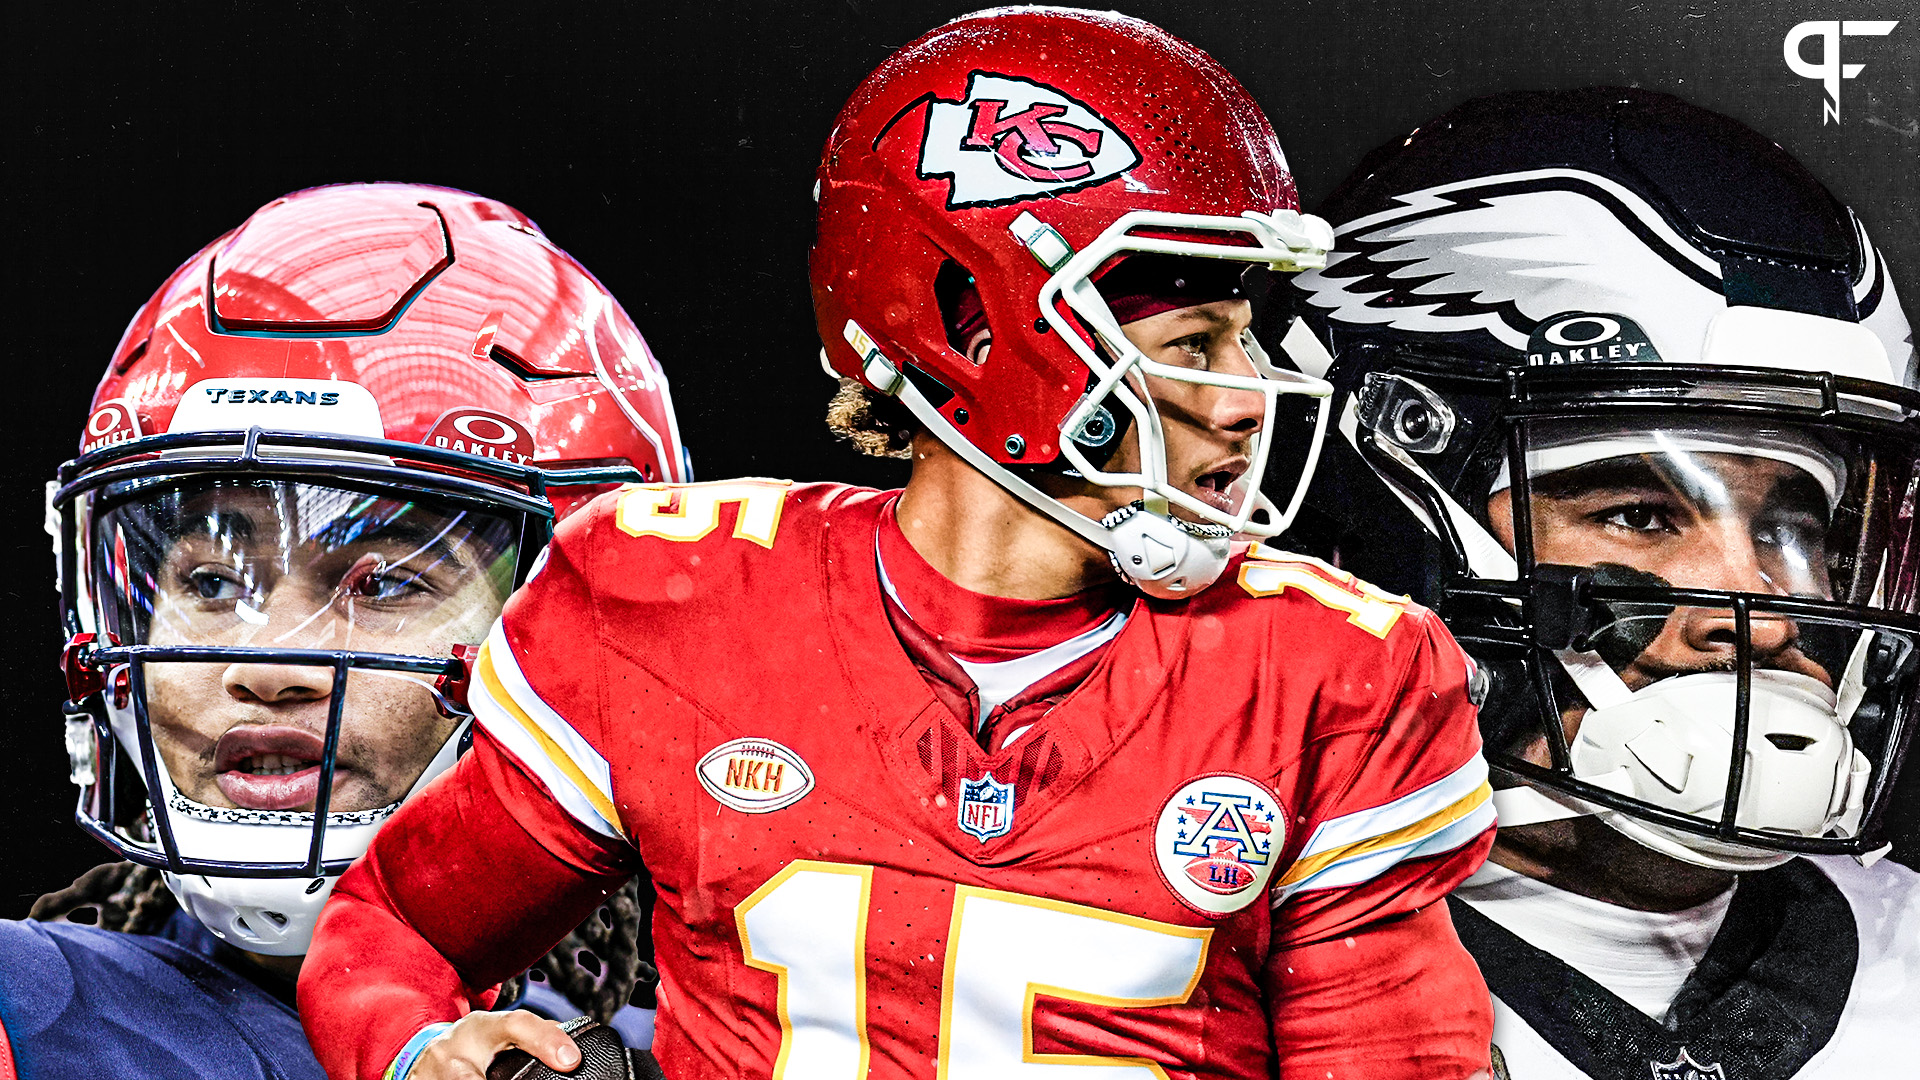 Nfl Week 12 Predictions And Picks Against The Spread From Betting Experts Picks Include Cj